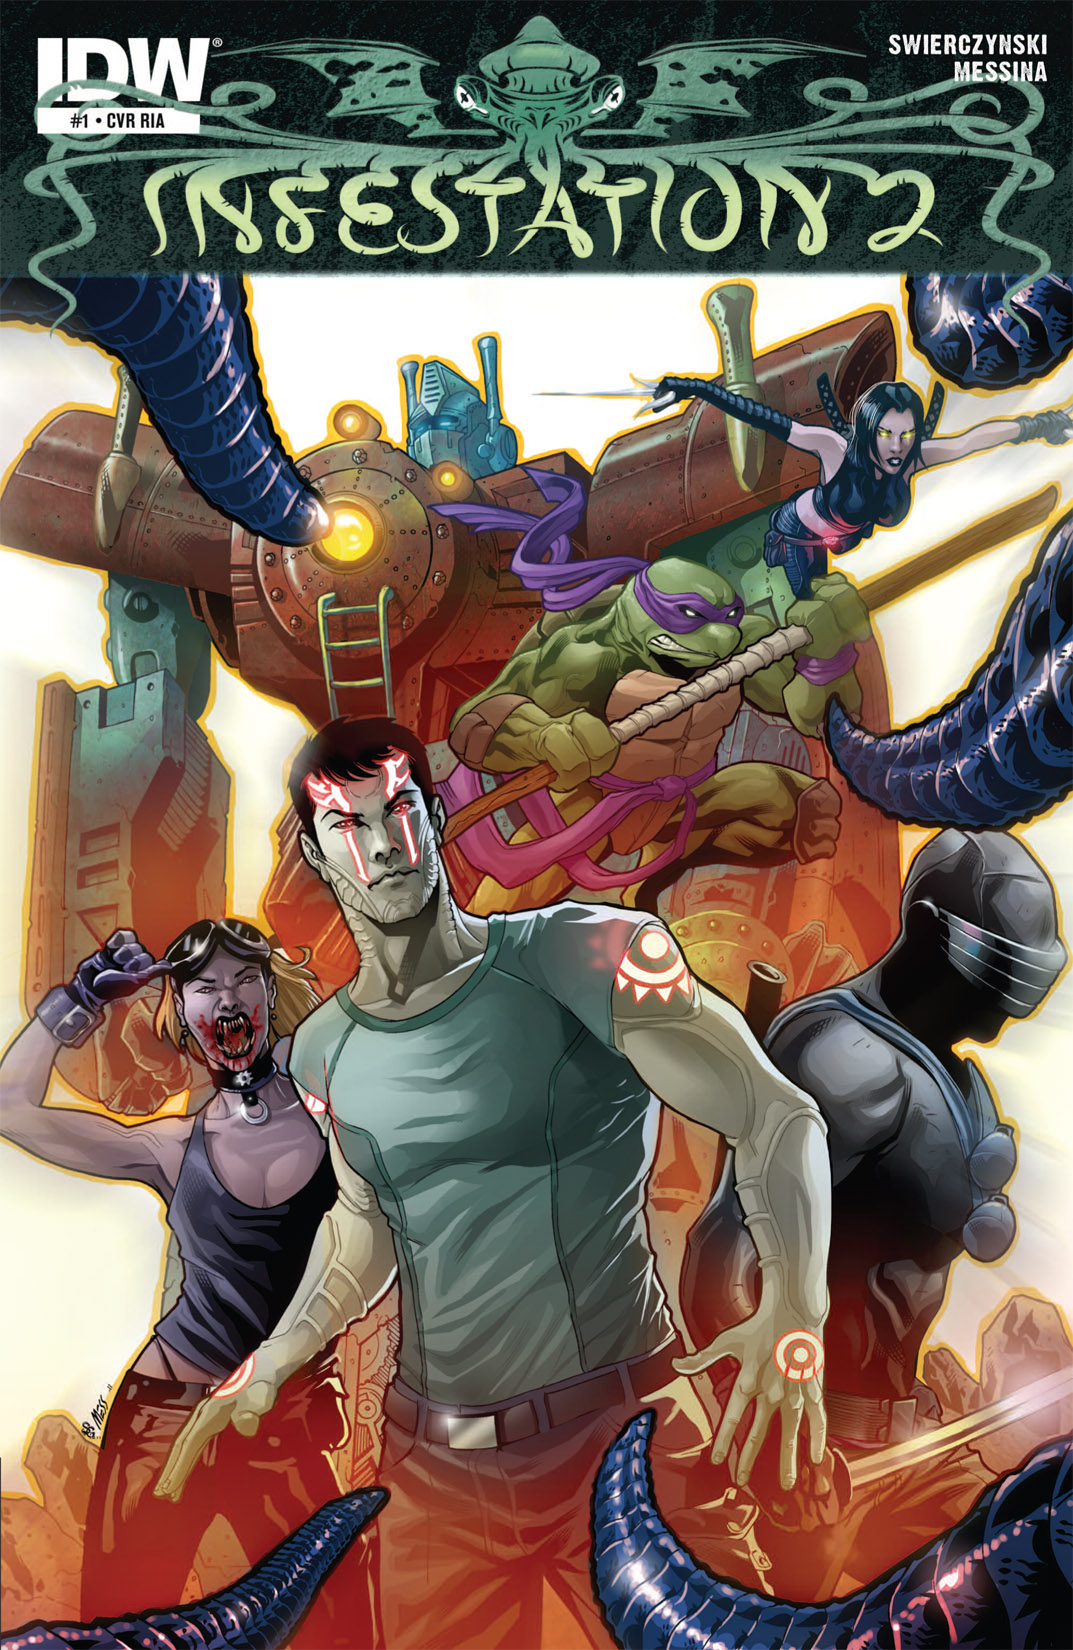 Read online Infestation 2 comic -  Issue #1 - 3